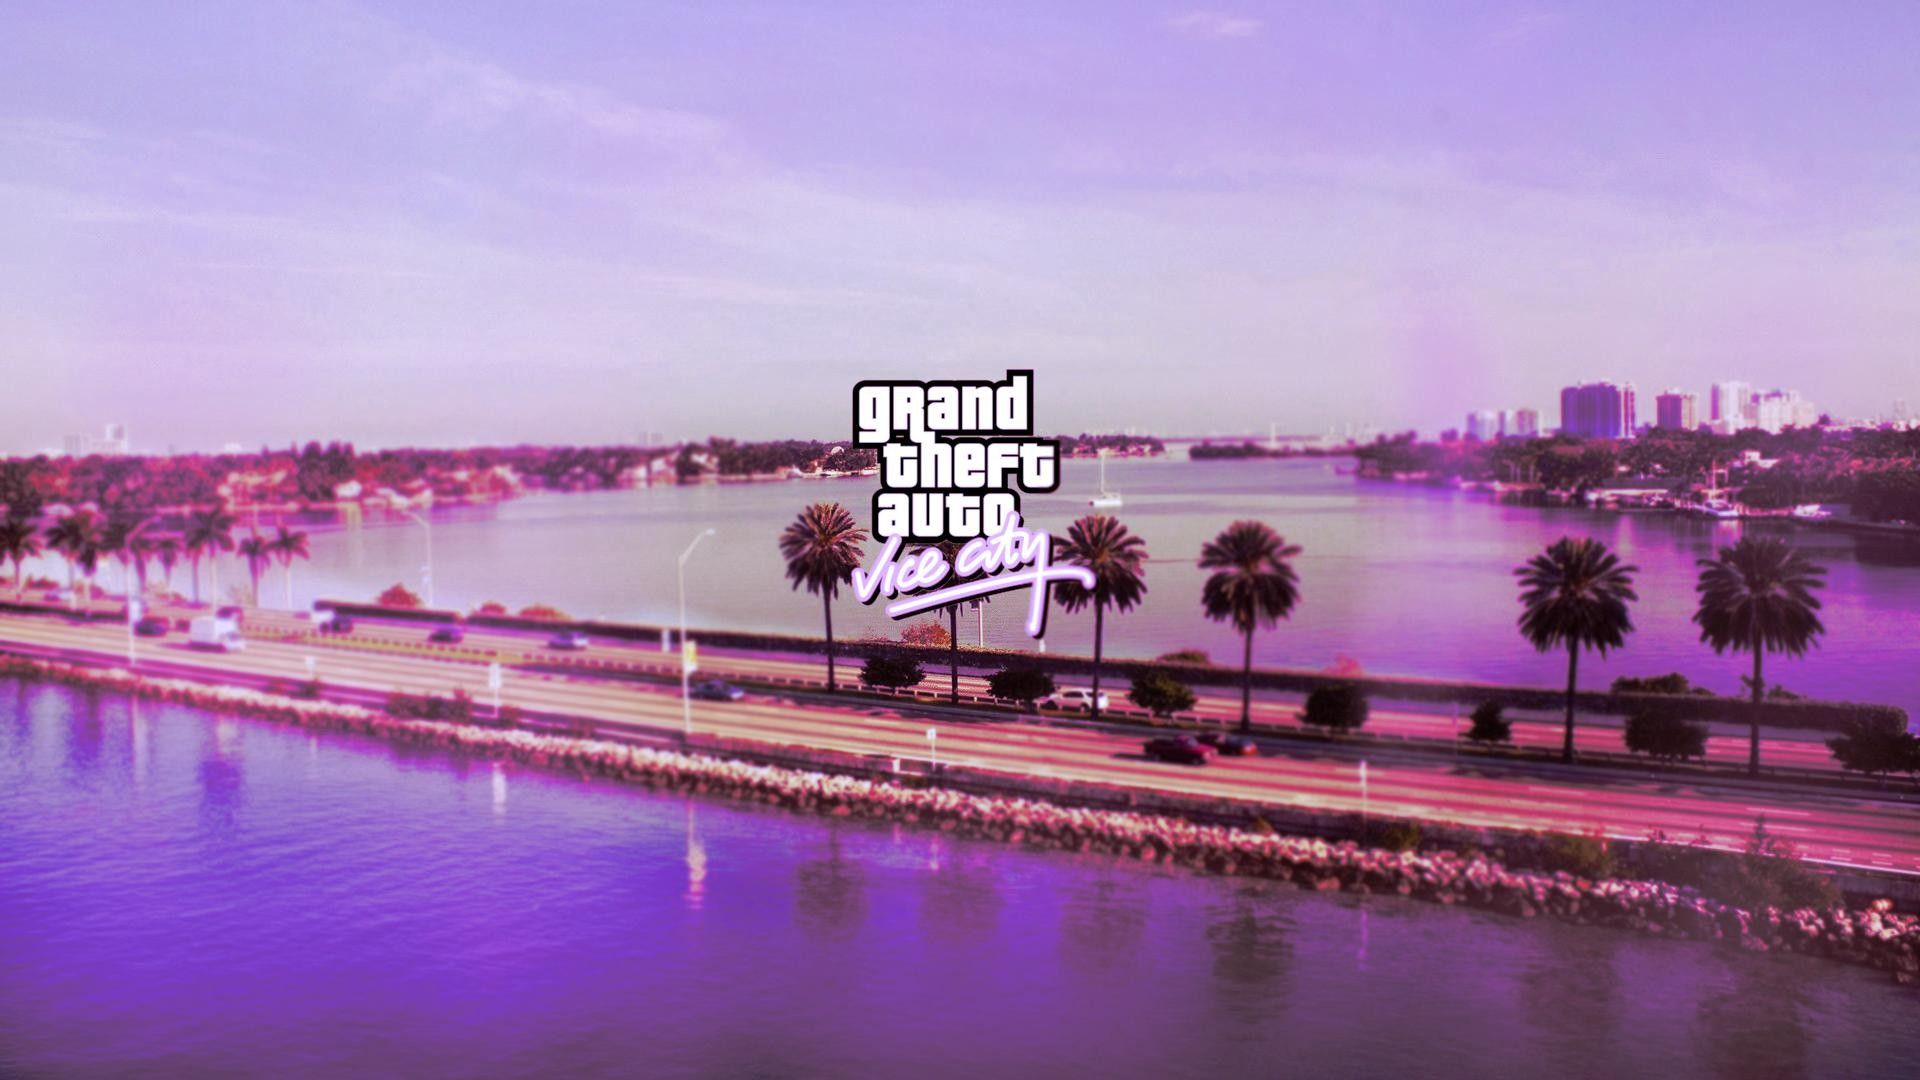 Grand Theft Auto Vice City, Road, Pink, Logo, Sea, Lake, PC Gaming Wallpaper HD / Desktop and Mobile Background